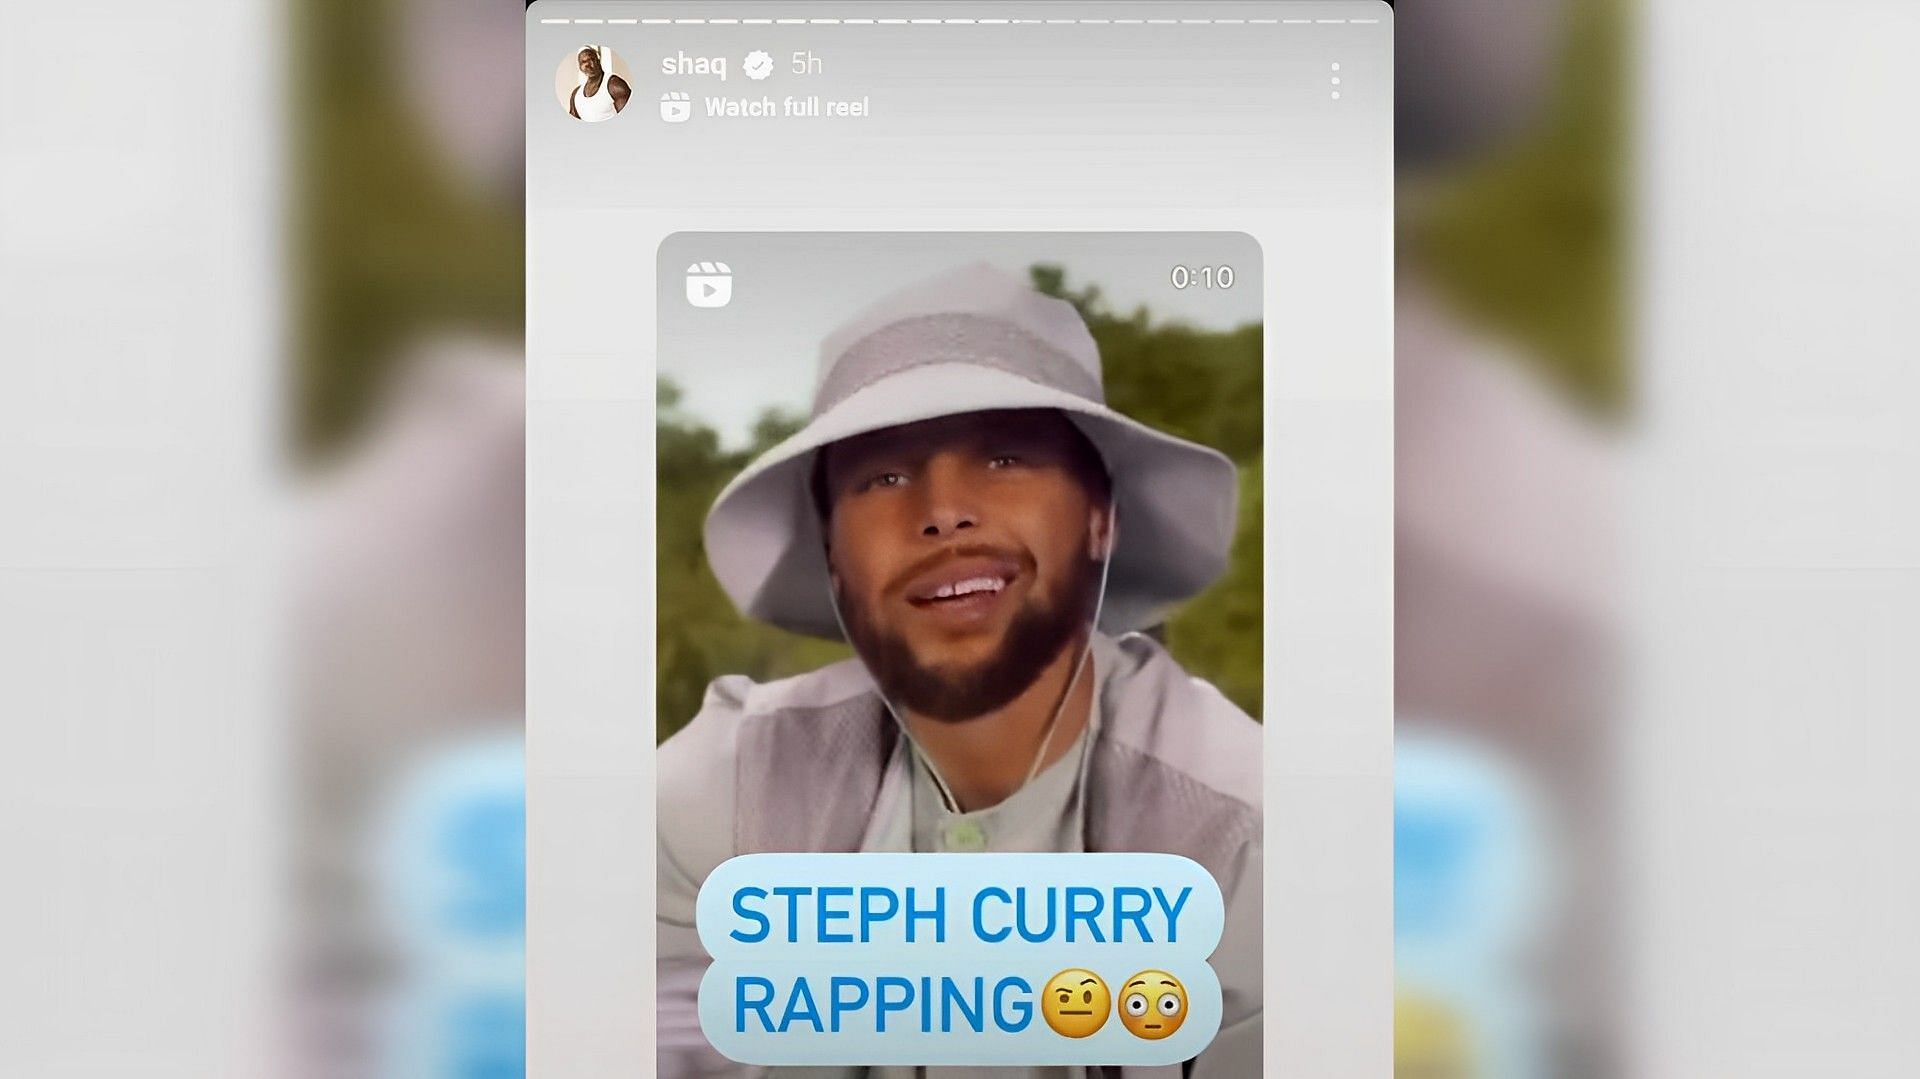 Steph Curry unleashes new talent as rapping skills earn resounding approval from Shaquille O